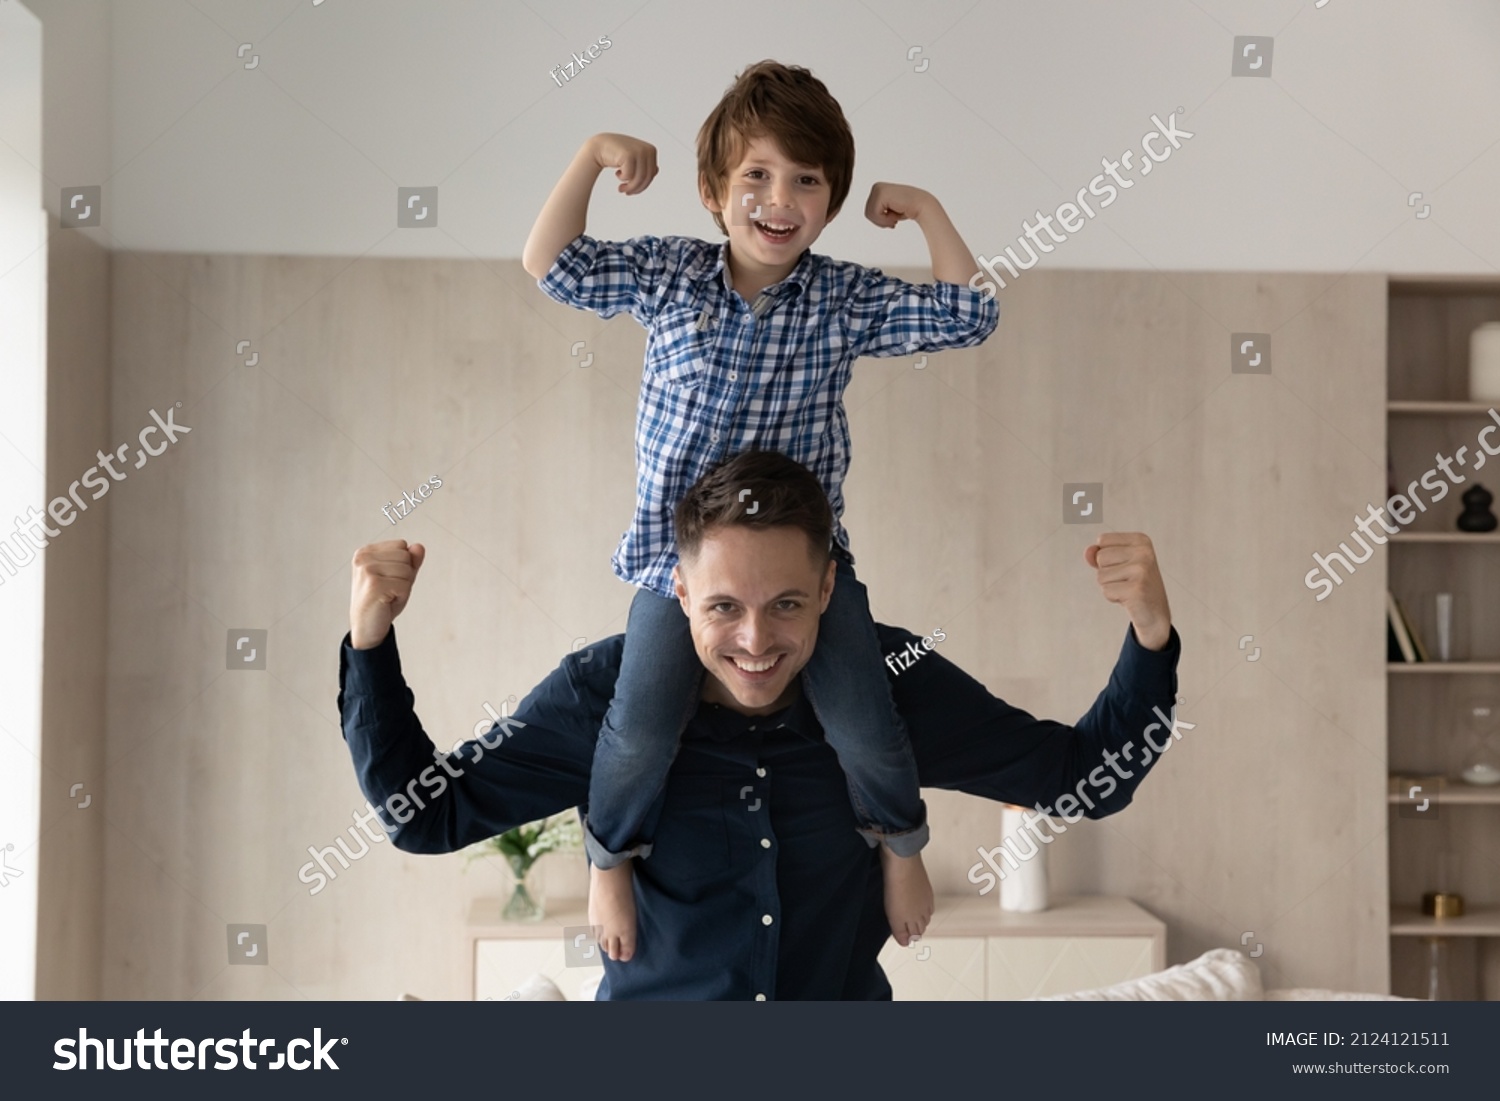 Cheerful little boy riding on happy dads neck and shoulders, making powerful hands. Strong daddy keeping balance with kid on top, flexing arm muscles, smiling at camera. Father and son portrait #2124121511